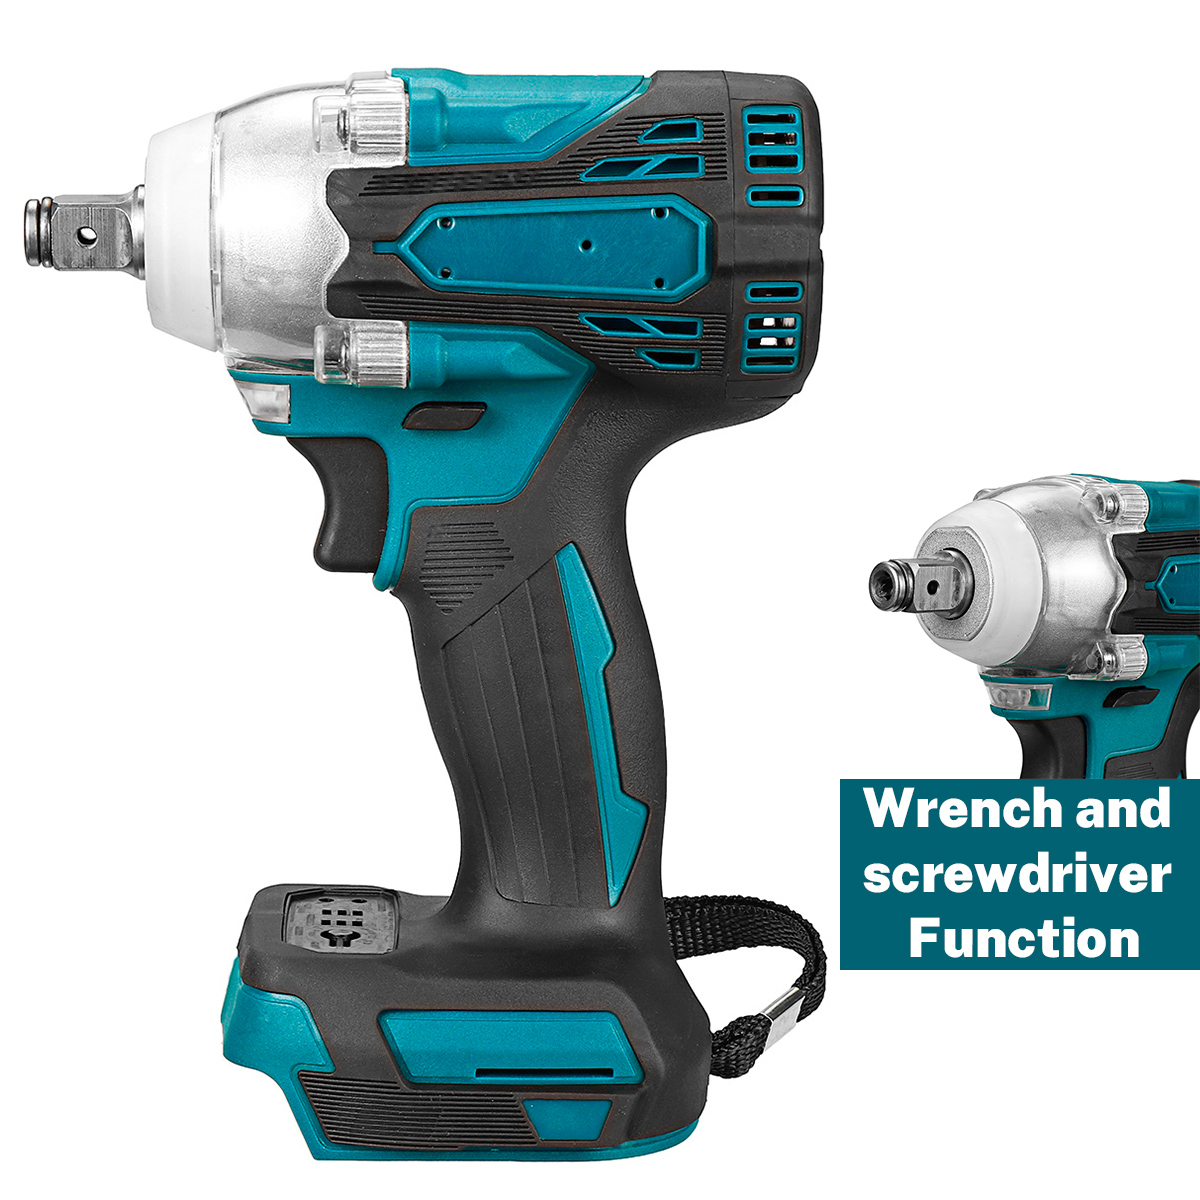 125mm-Cordless-Brushless-Impact-Wrench-Drill-Drive-Screwdriver-Power-Tool-For-Makita-18V-battery-1855969-7